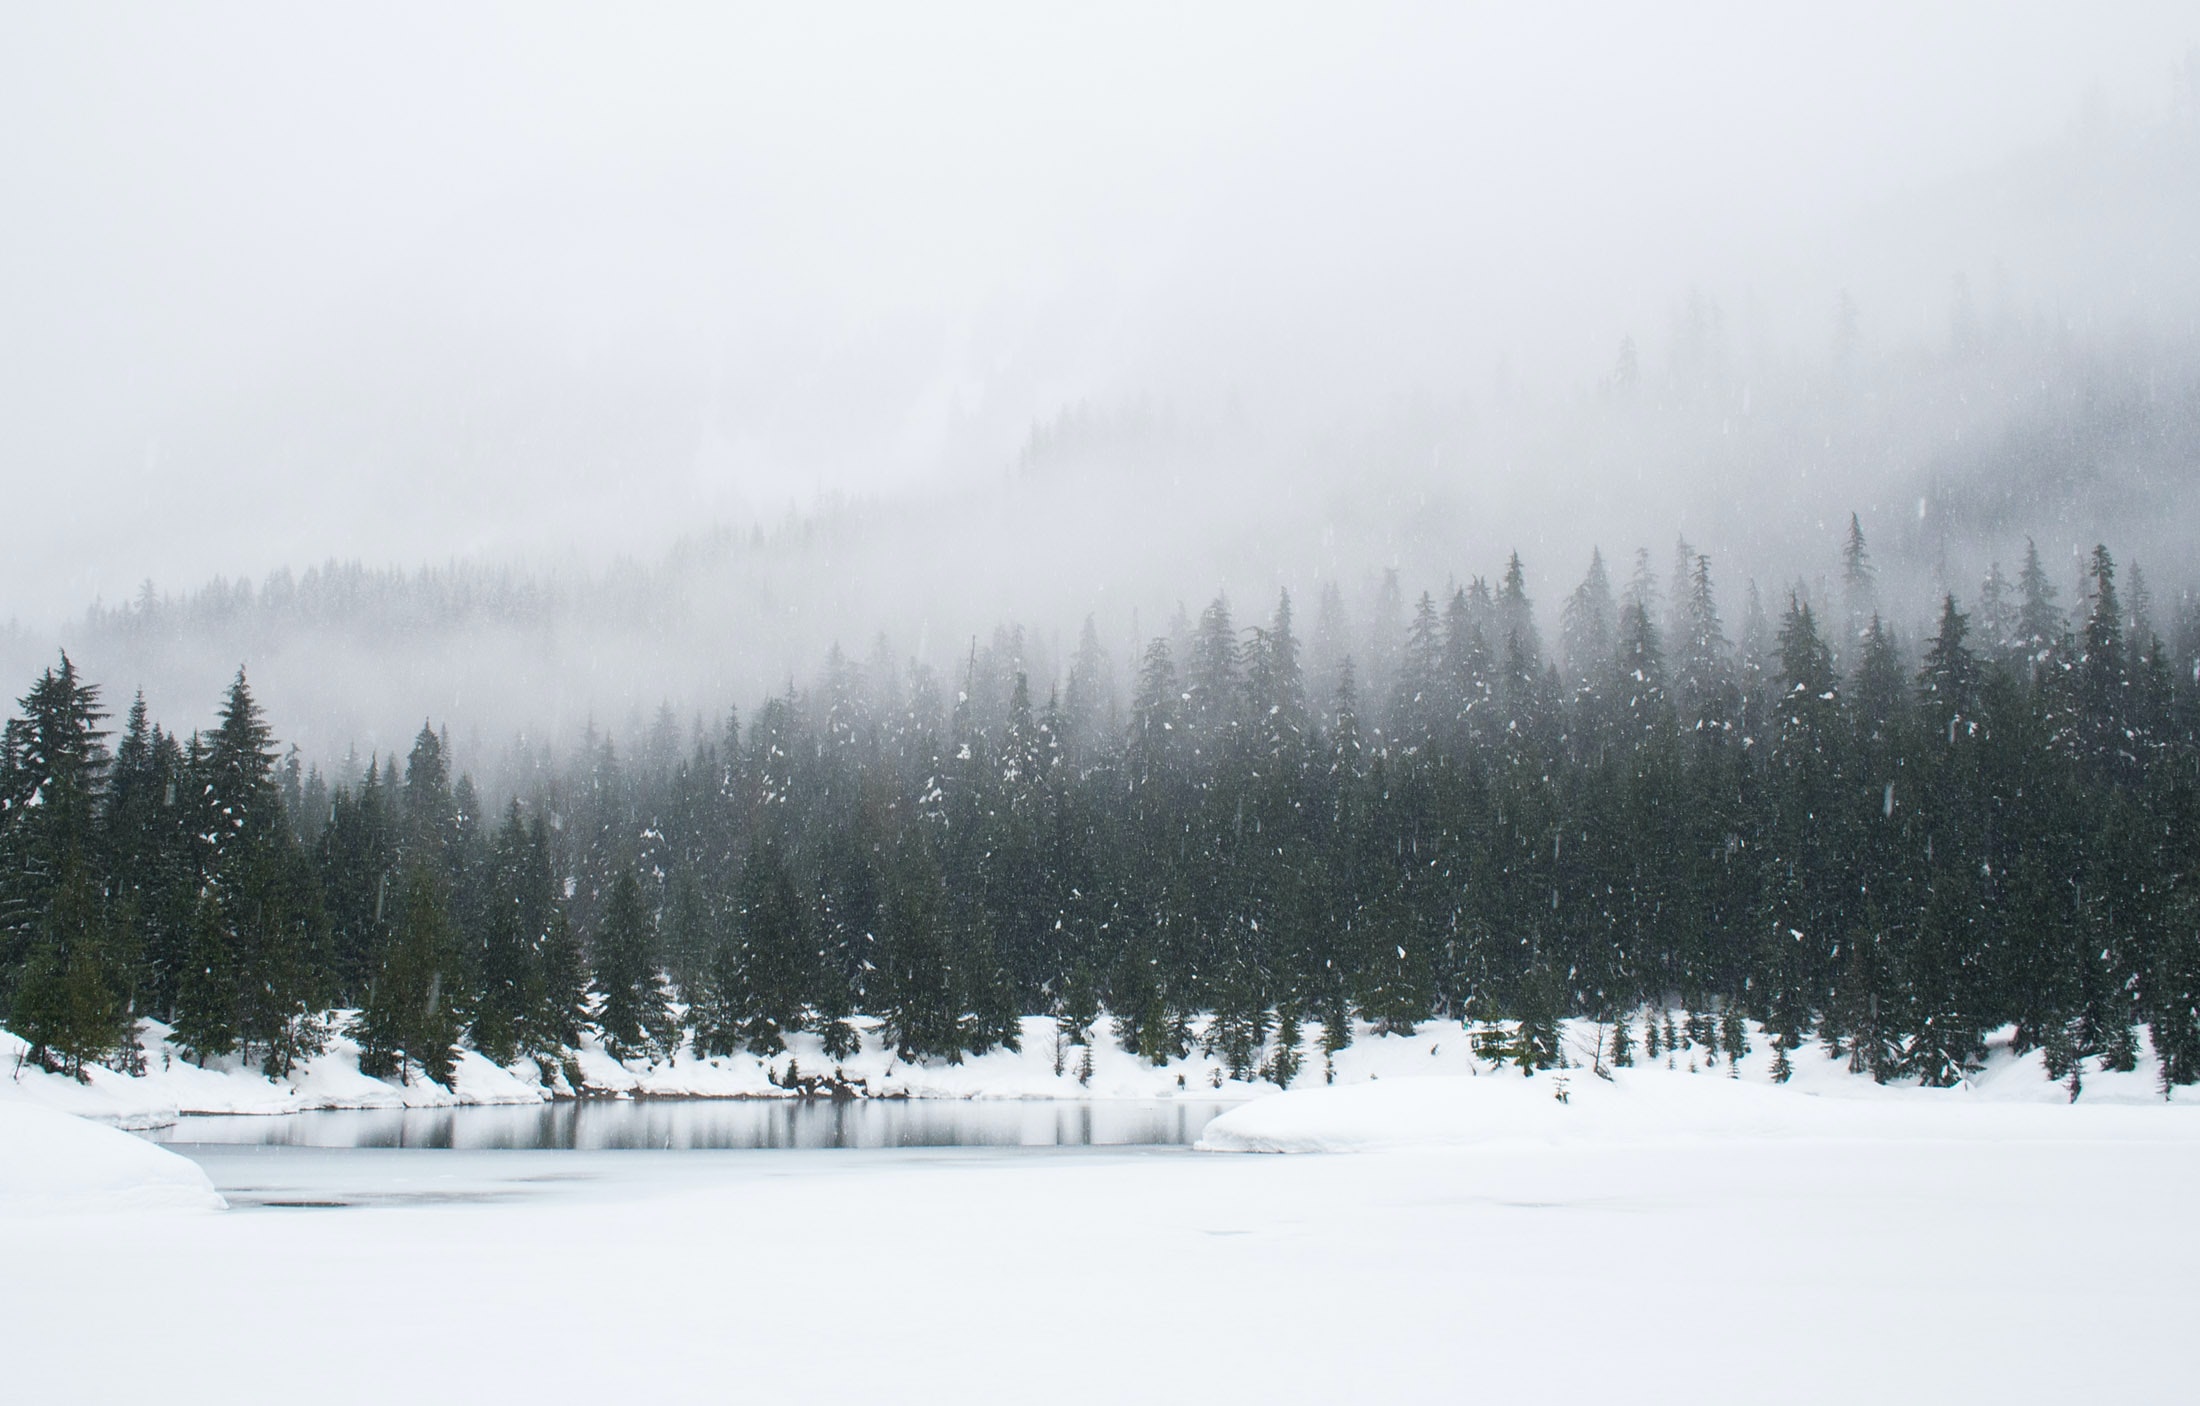 scene of a frozen lake surrounded by snow and pine trees